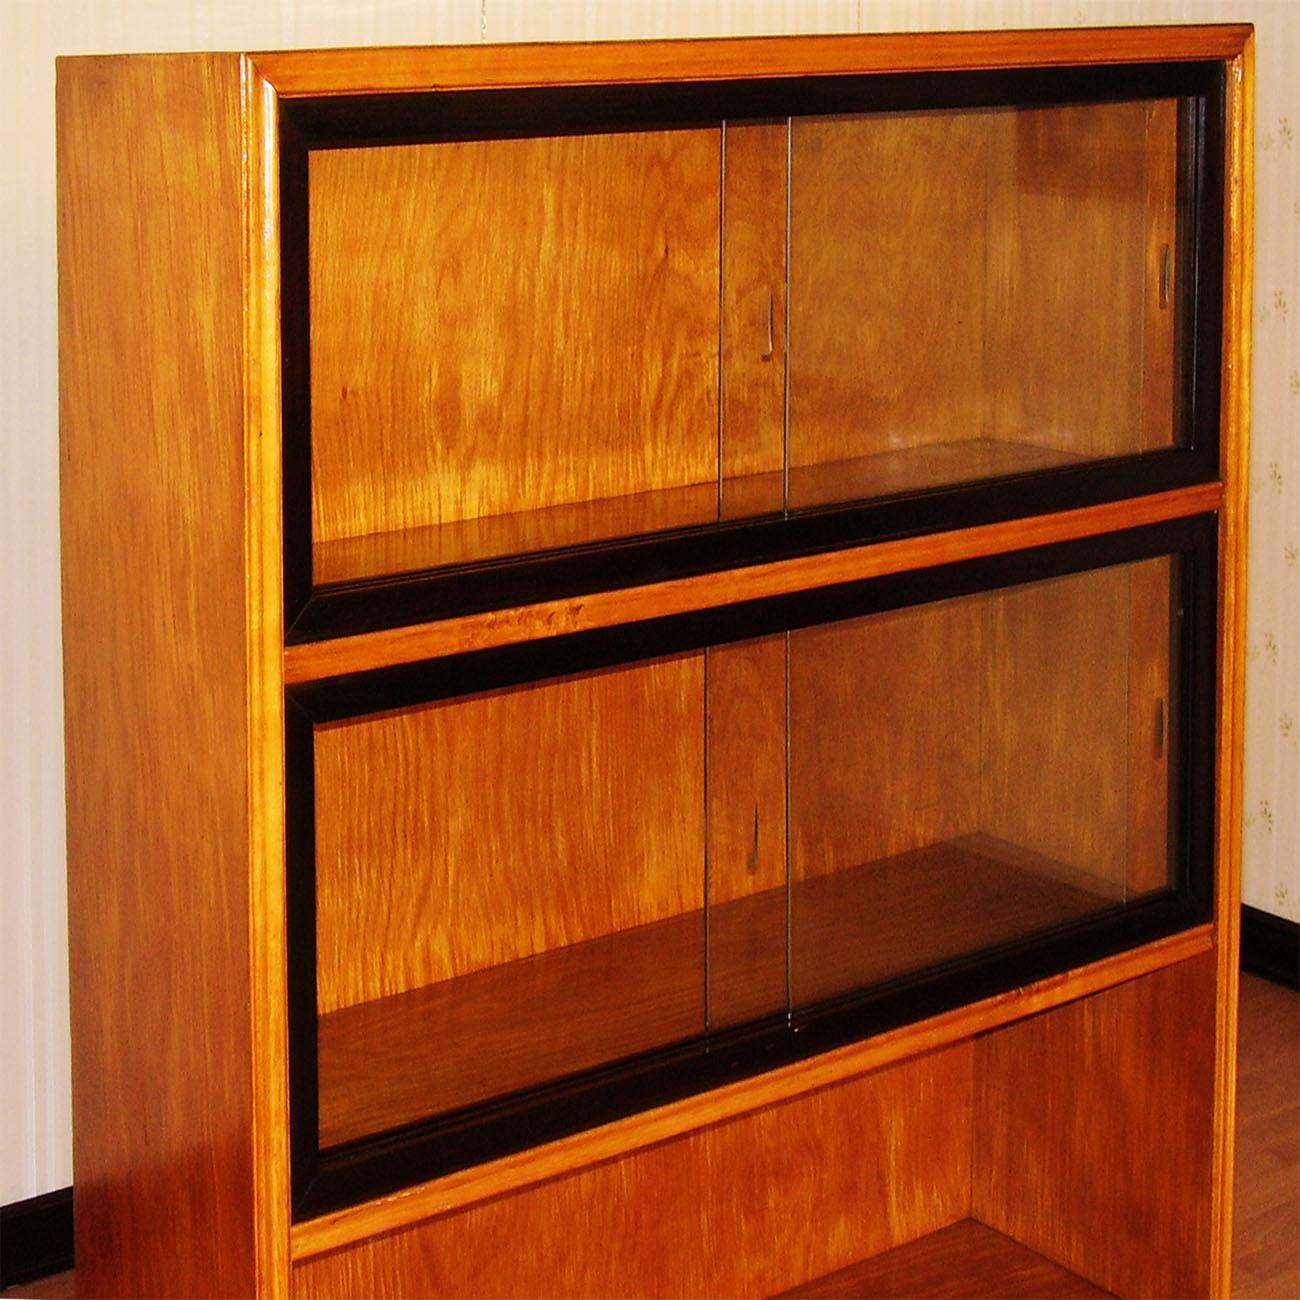 1930s Italy Art Deco Mid-Century Modern bookshelf or bookcase in wood of cherry and walnut with display cabinet
bookshelf with two upper shelves closed with sliding glass on frames ebonized.
Restored and wax polished.


Measures cm: H 150, W 100, D